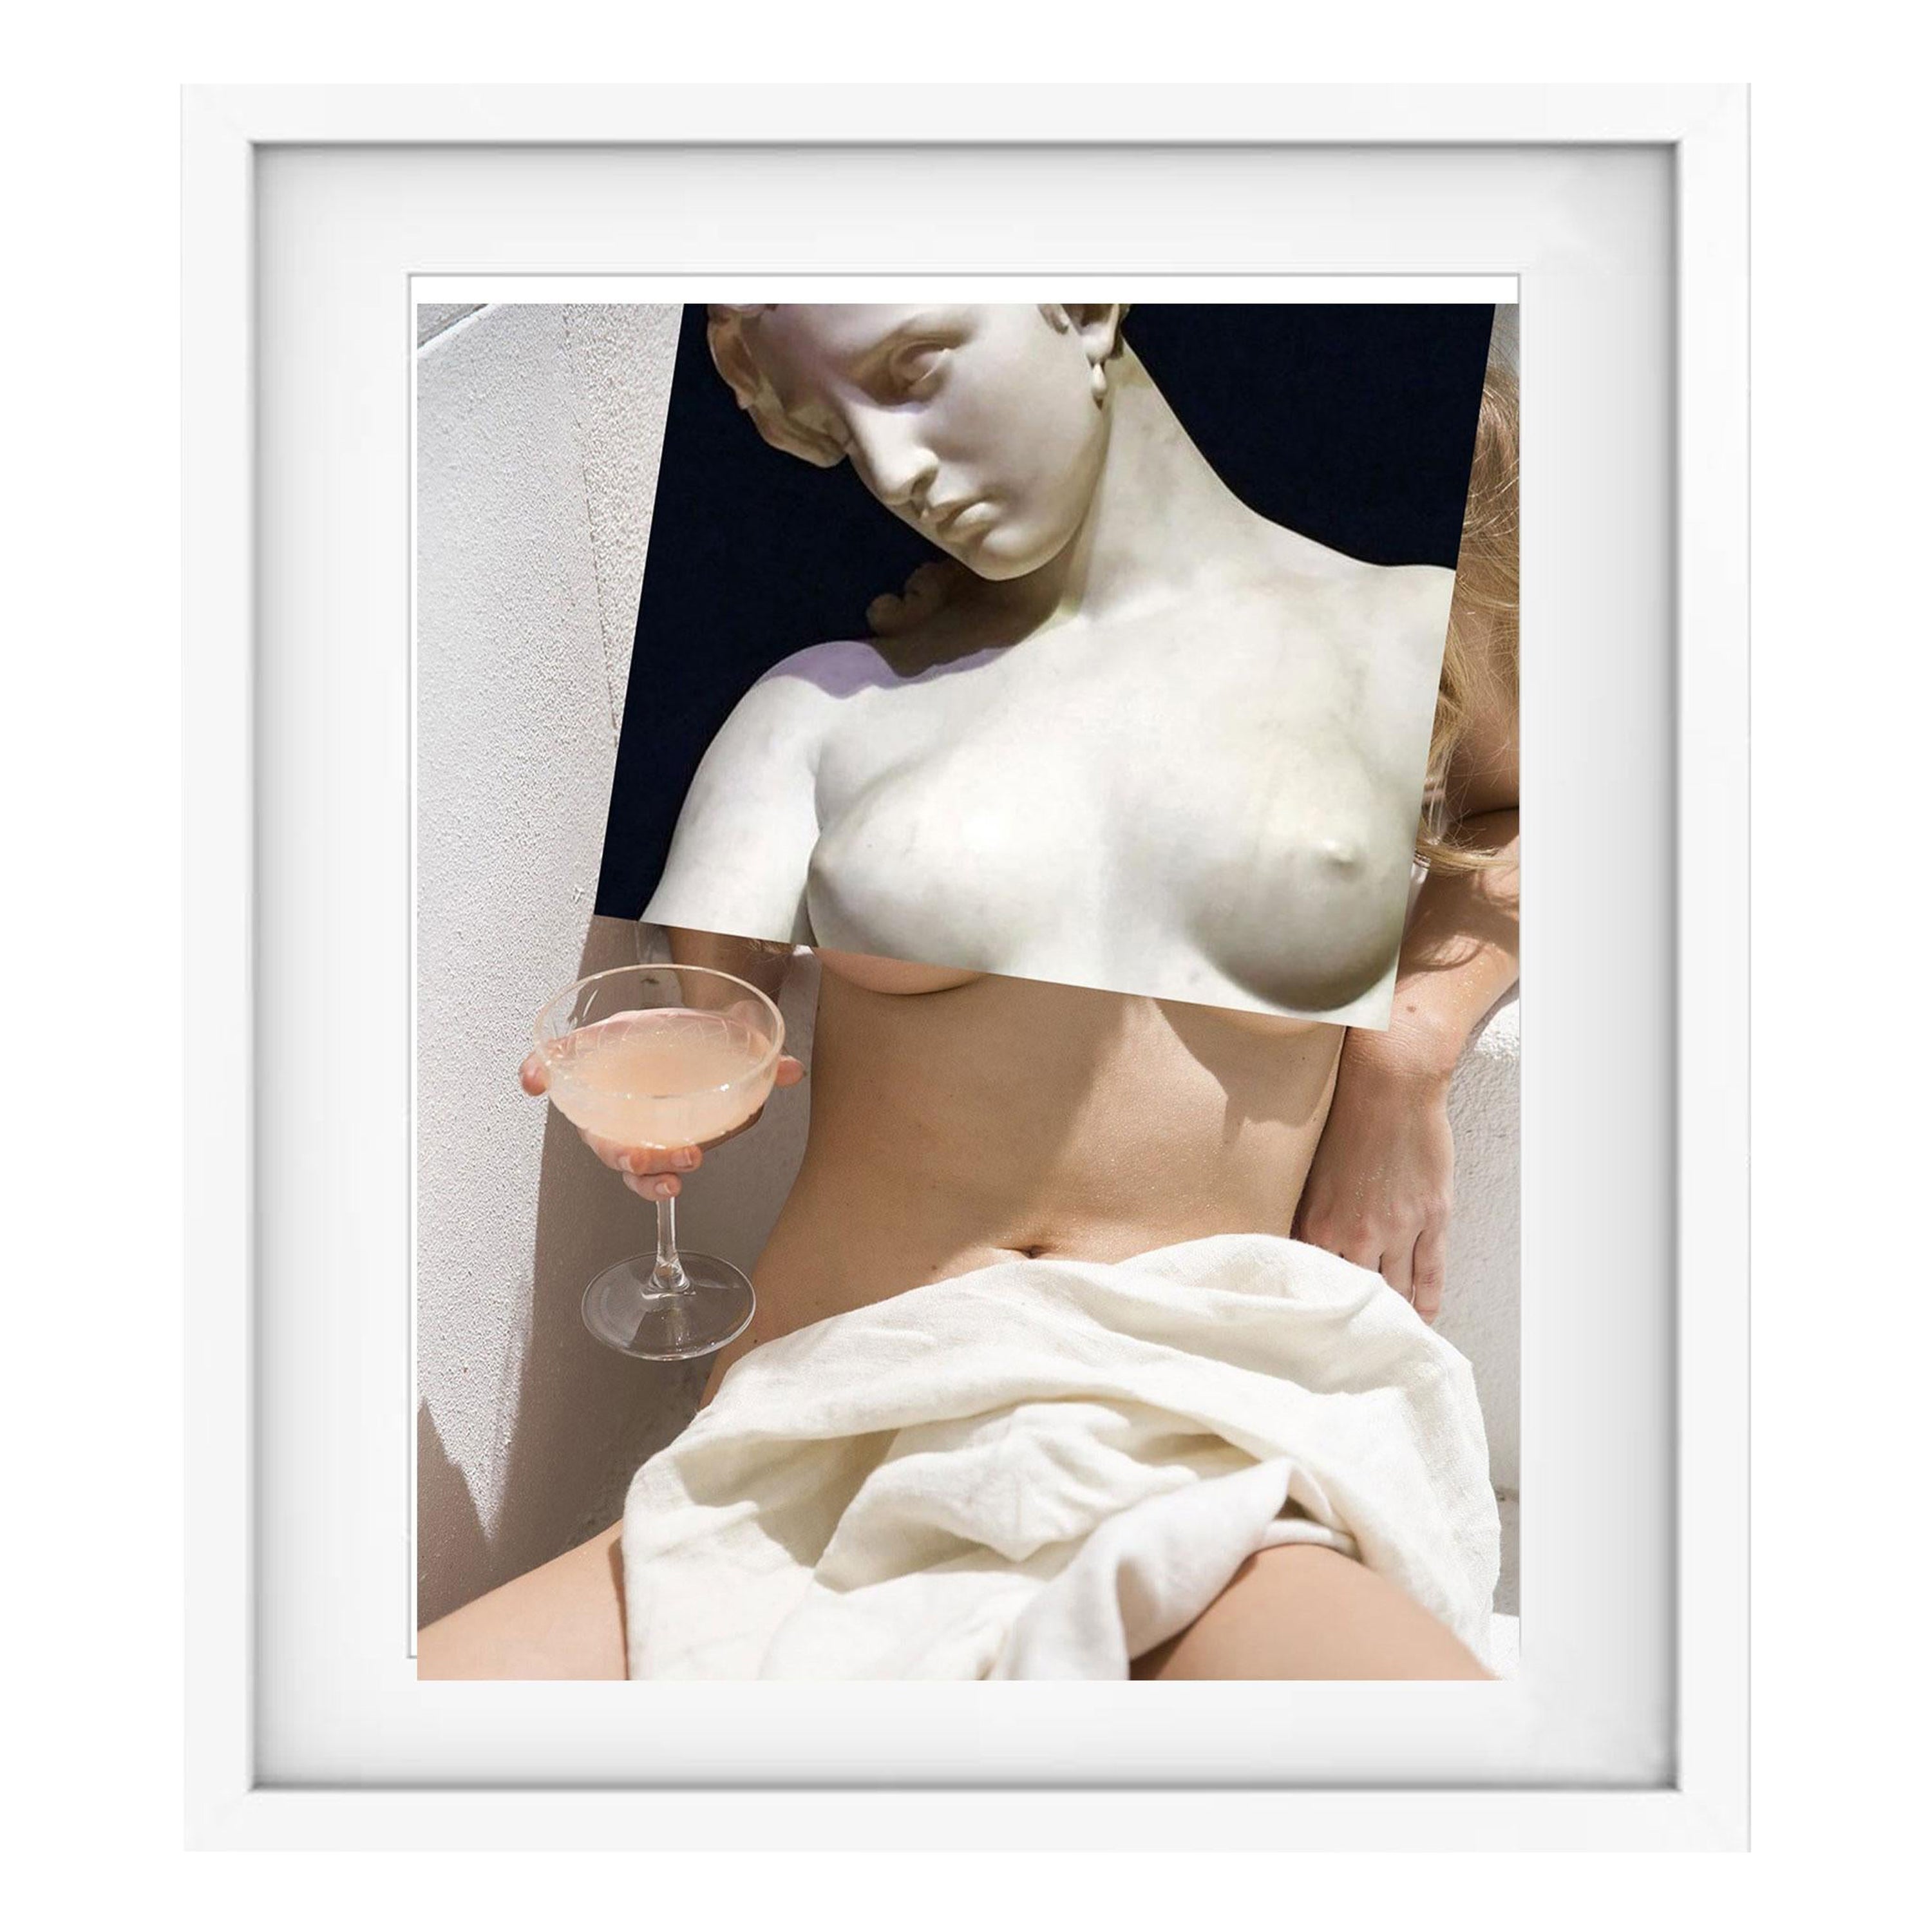 Classic Sculpture Erotic Naro Pinosa, "Untitled" Digital Collage, Spain, 2019 For Sale